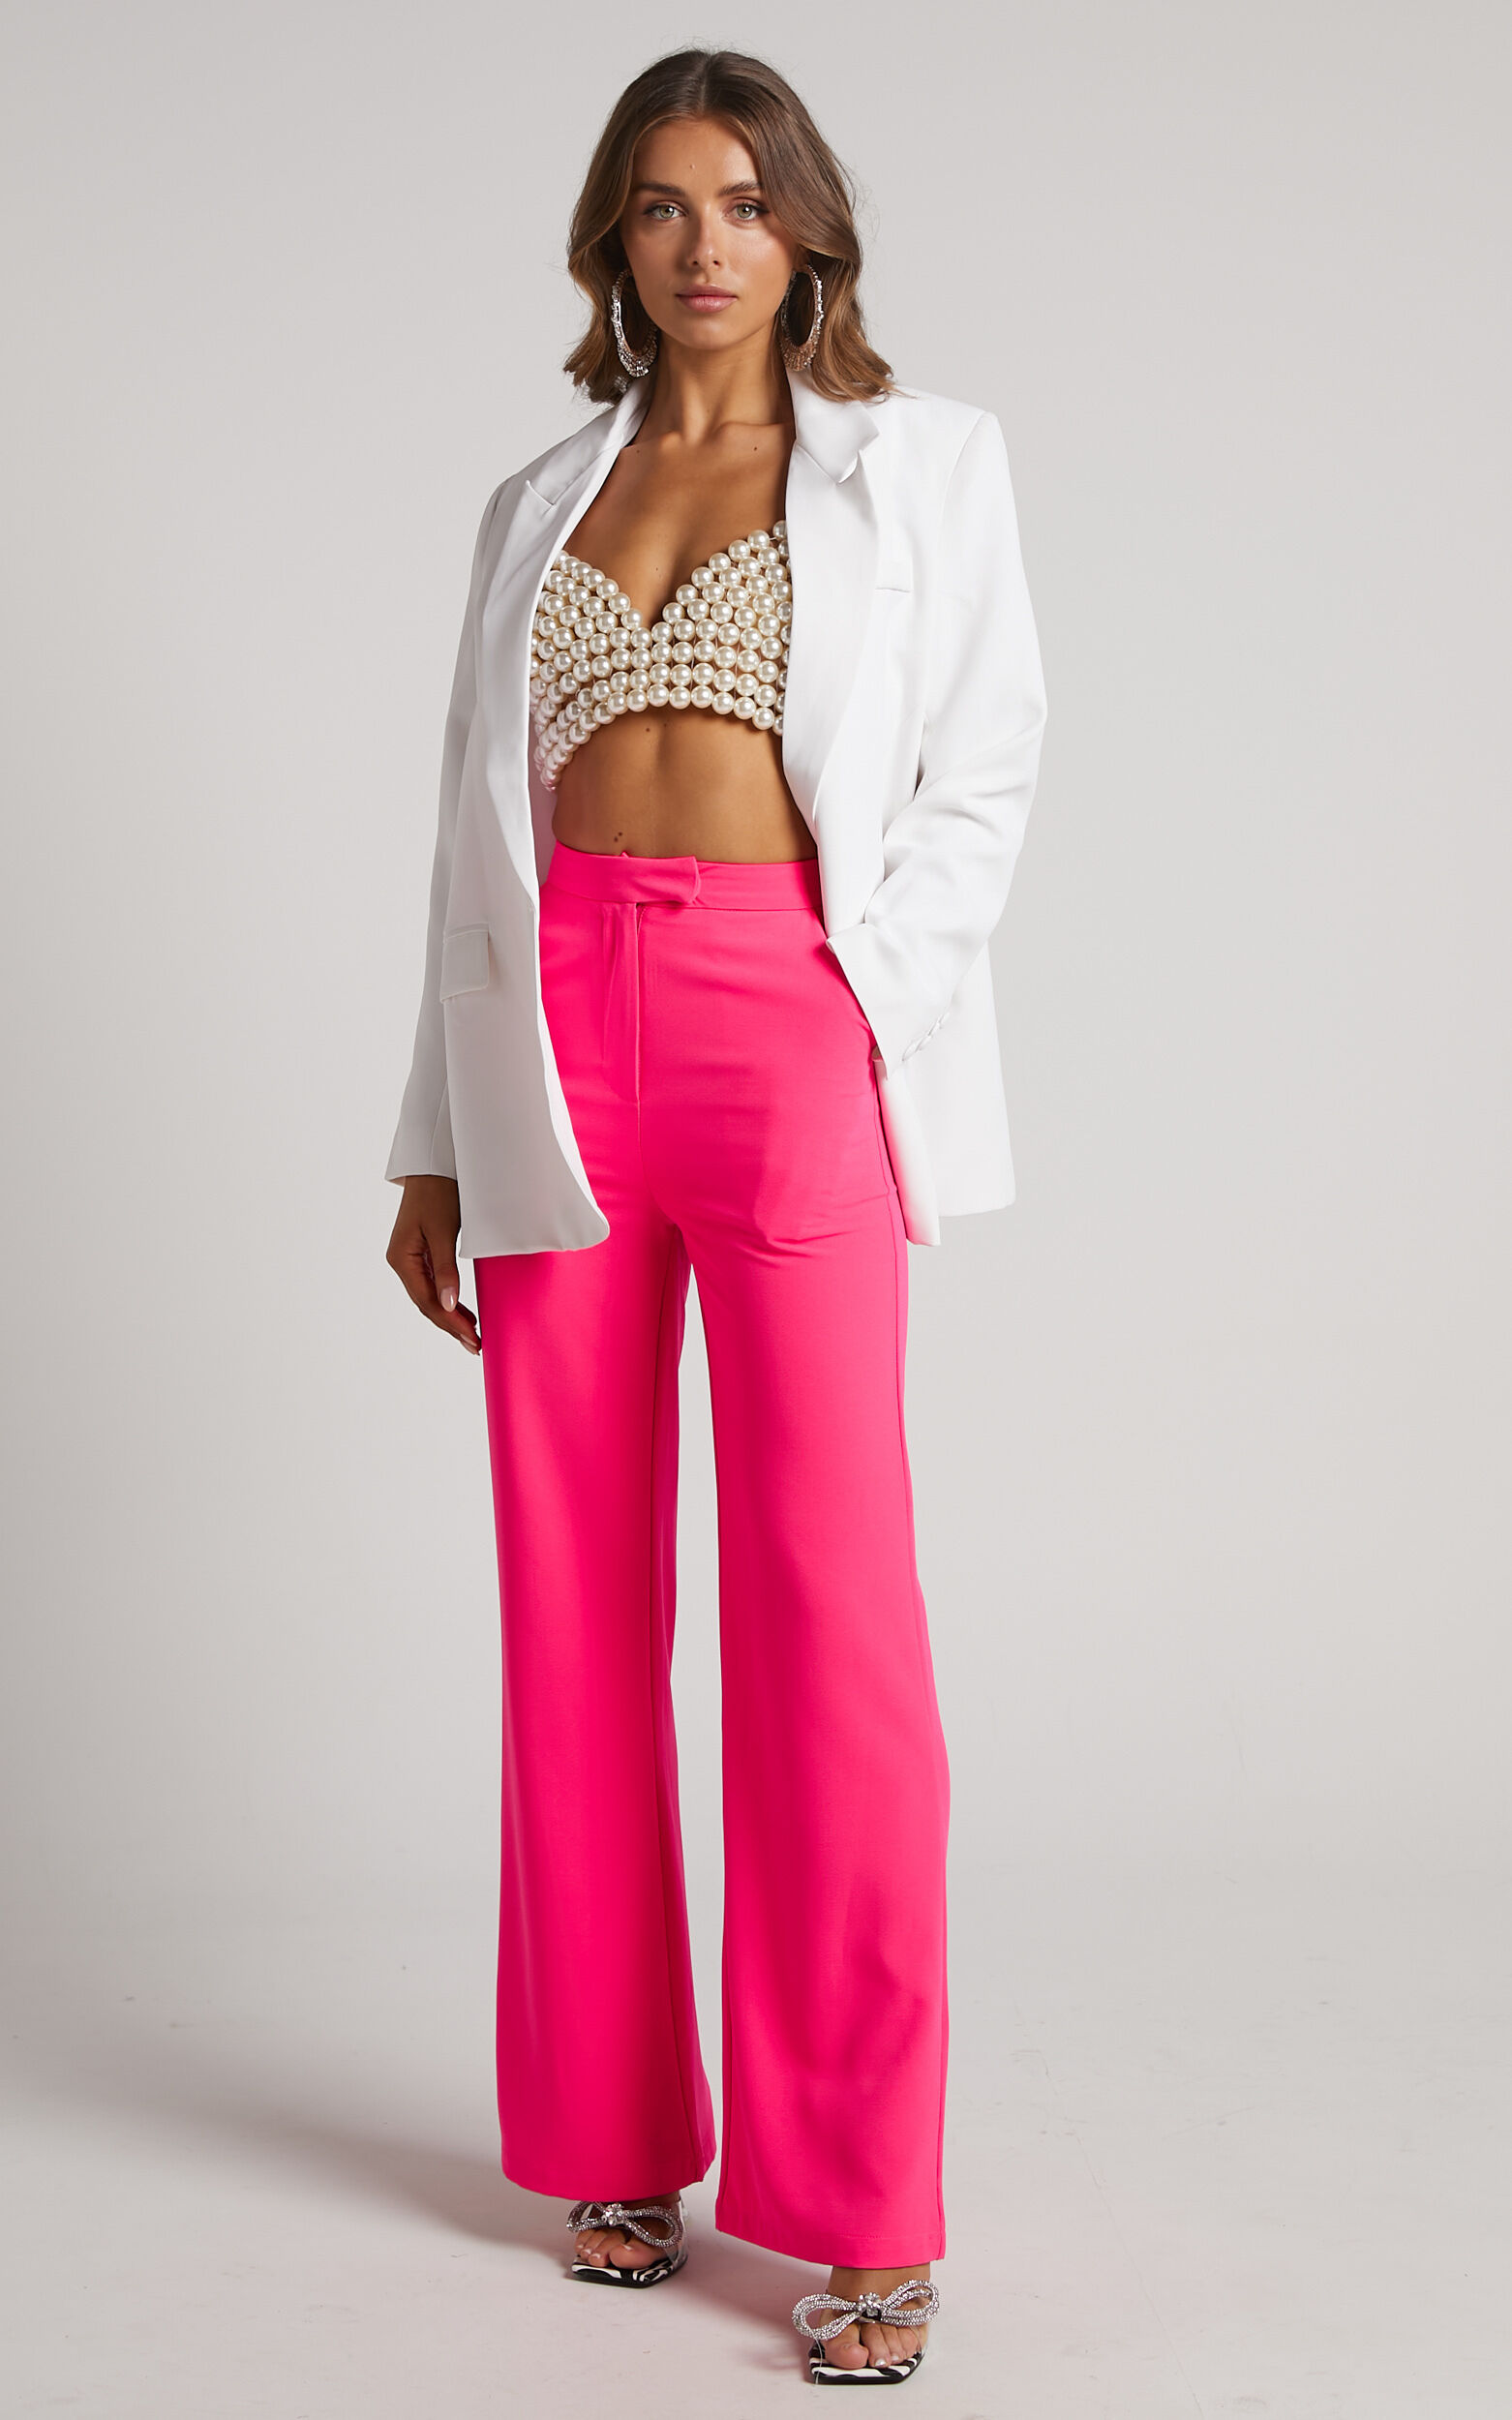 Kimmay Pants - Tailored Straight Leg Pants in Hot Pink - 04, PNK2, super-hi-res image number null